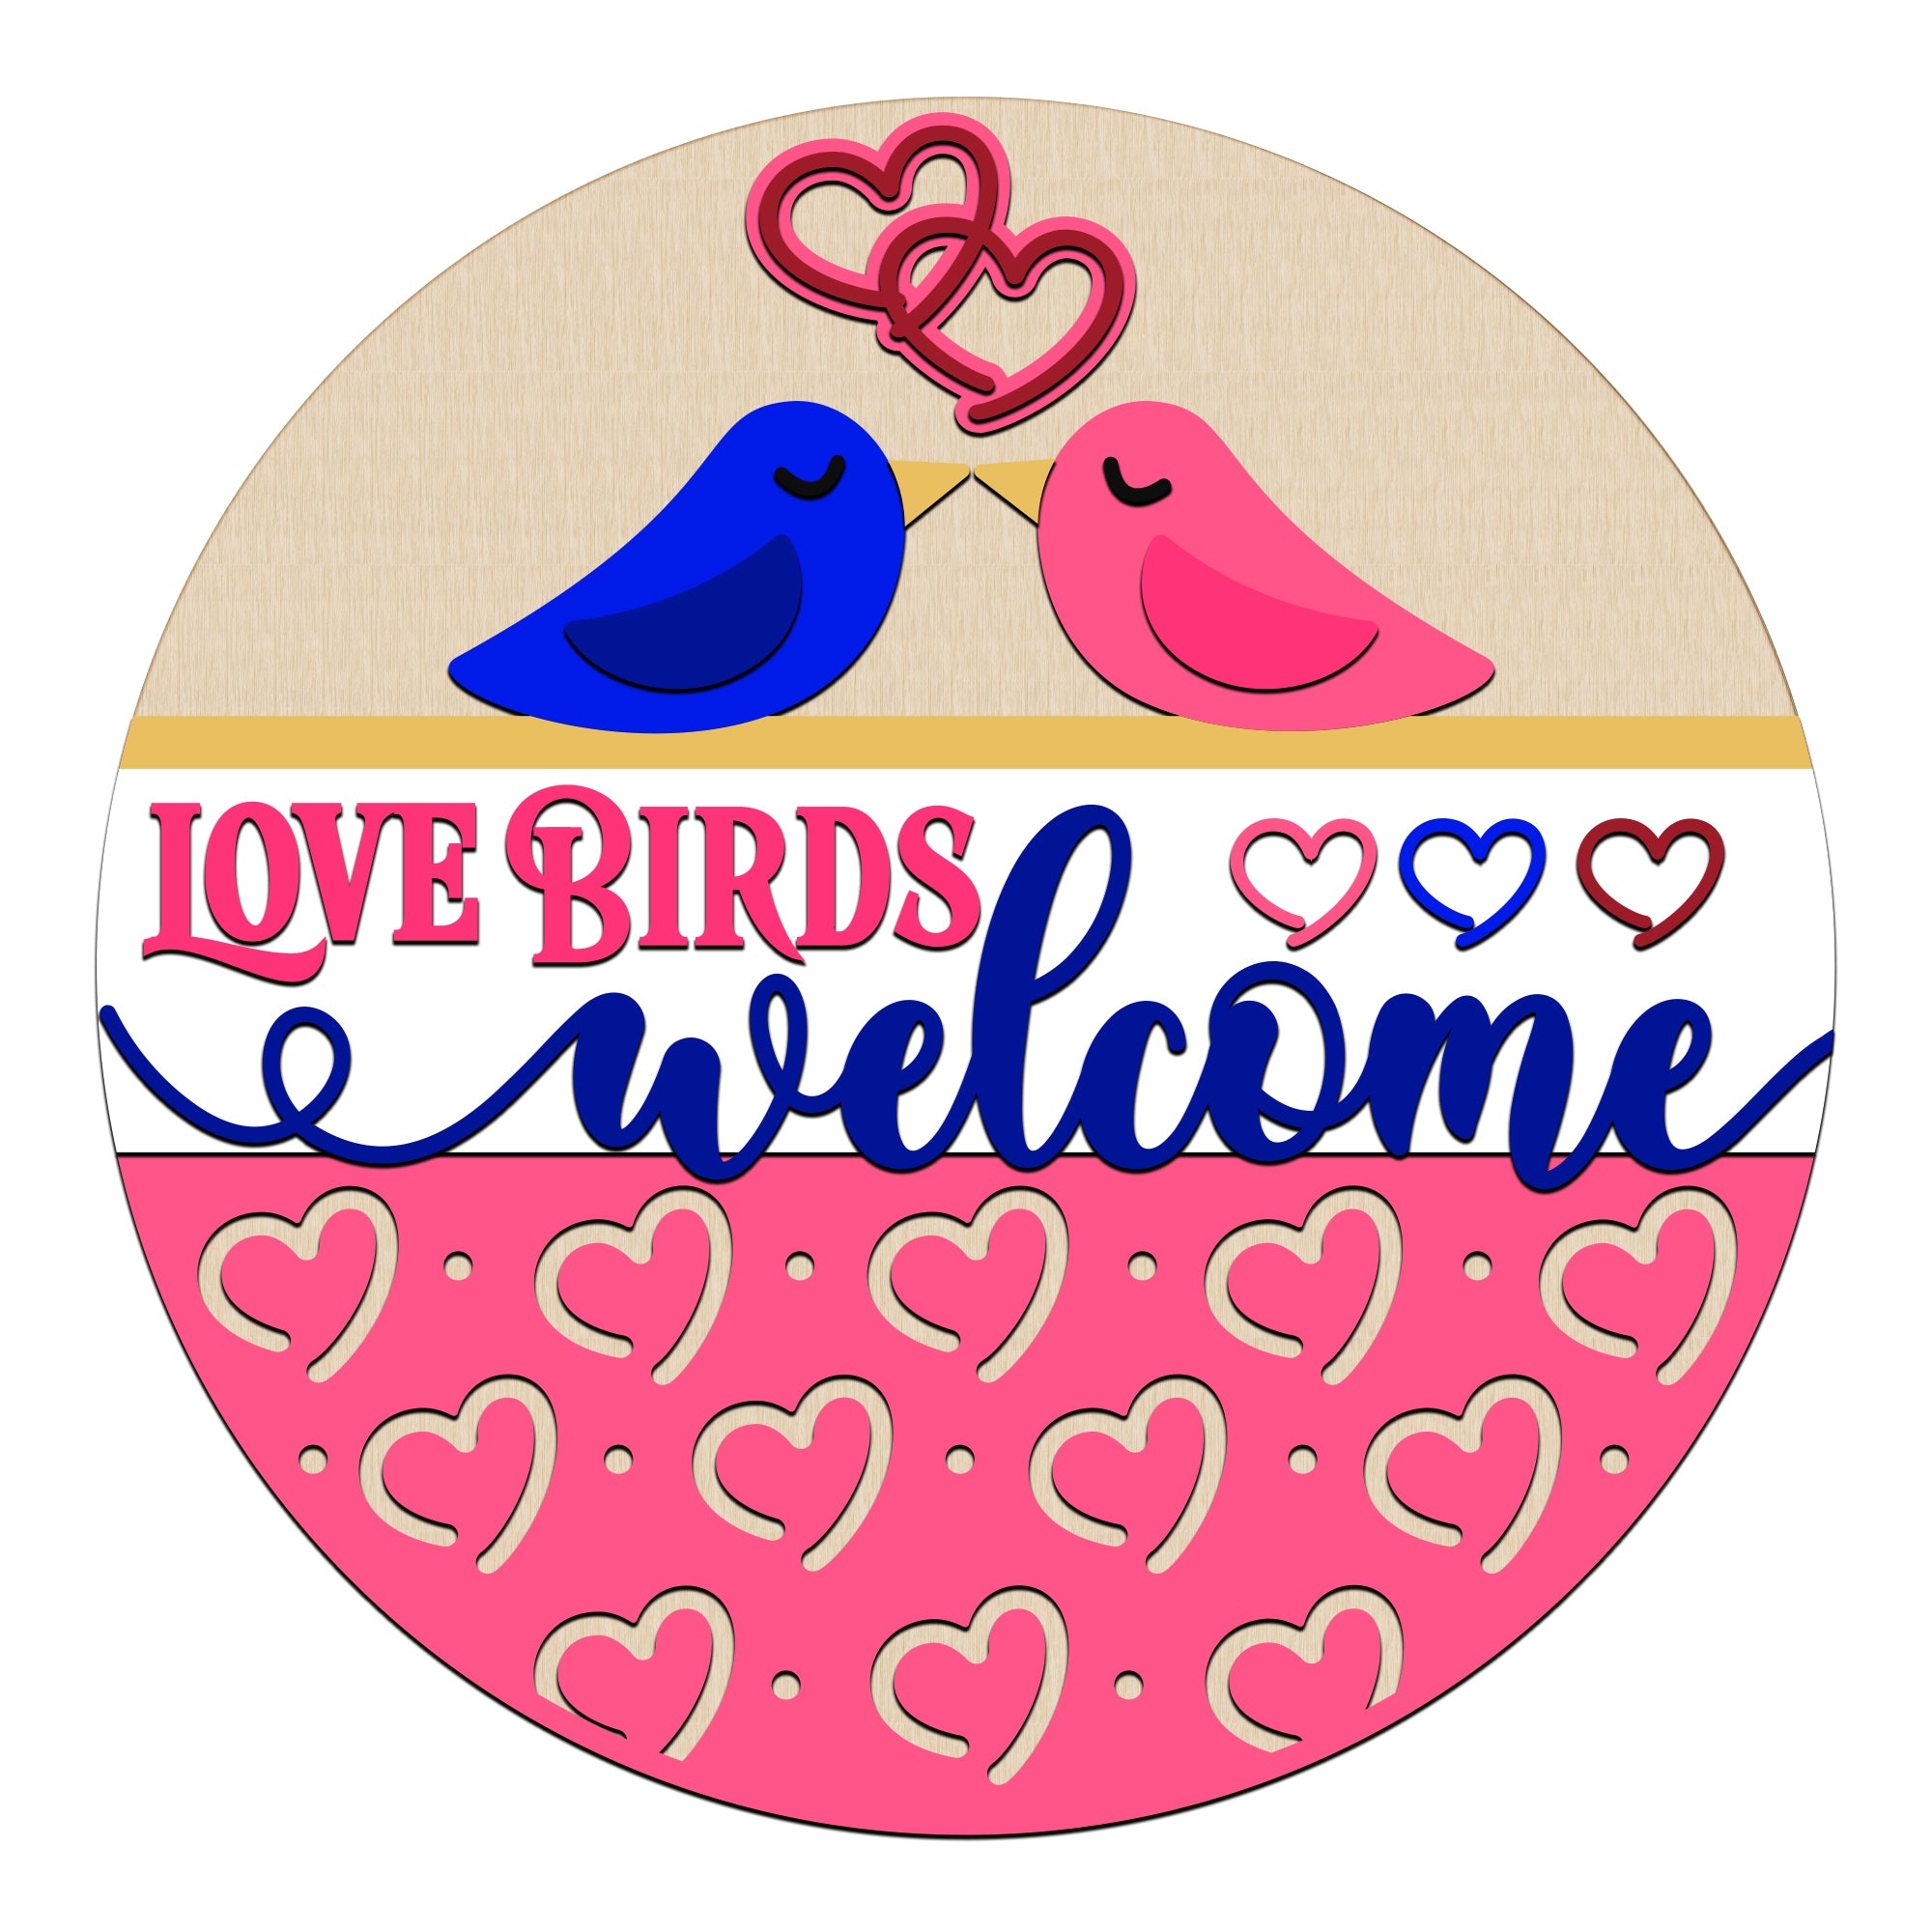 Love Birds Welcome Round Paint Kit V2